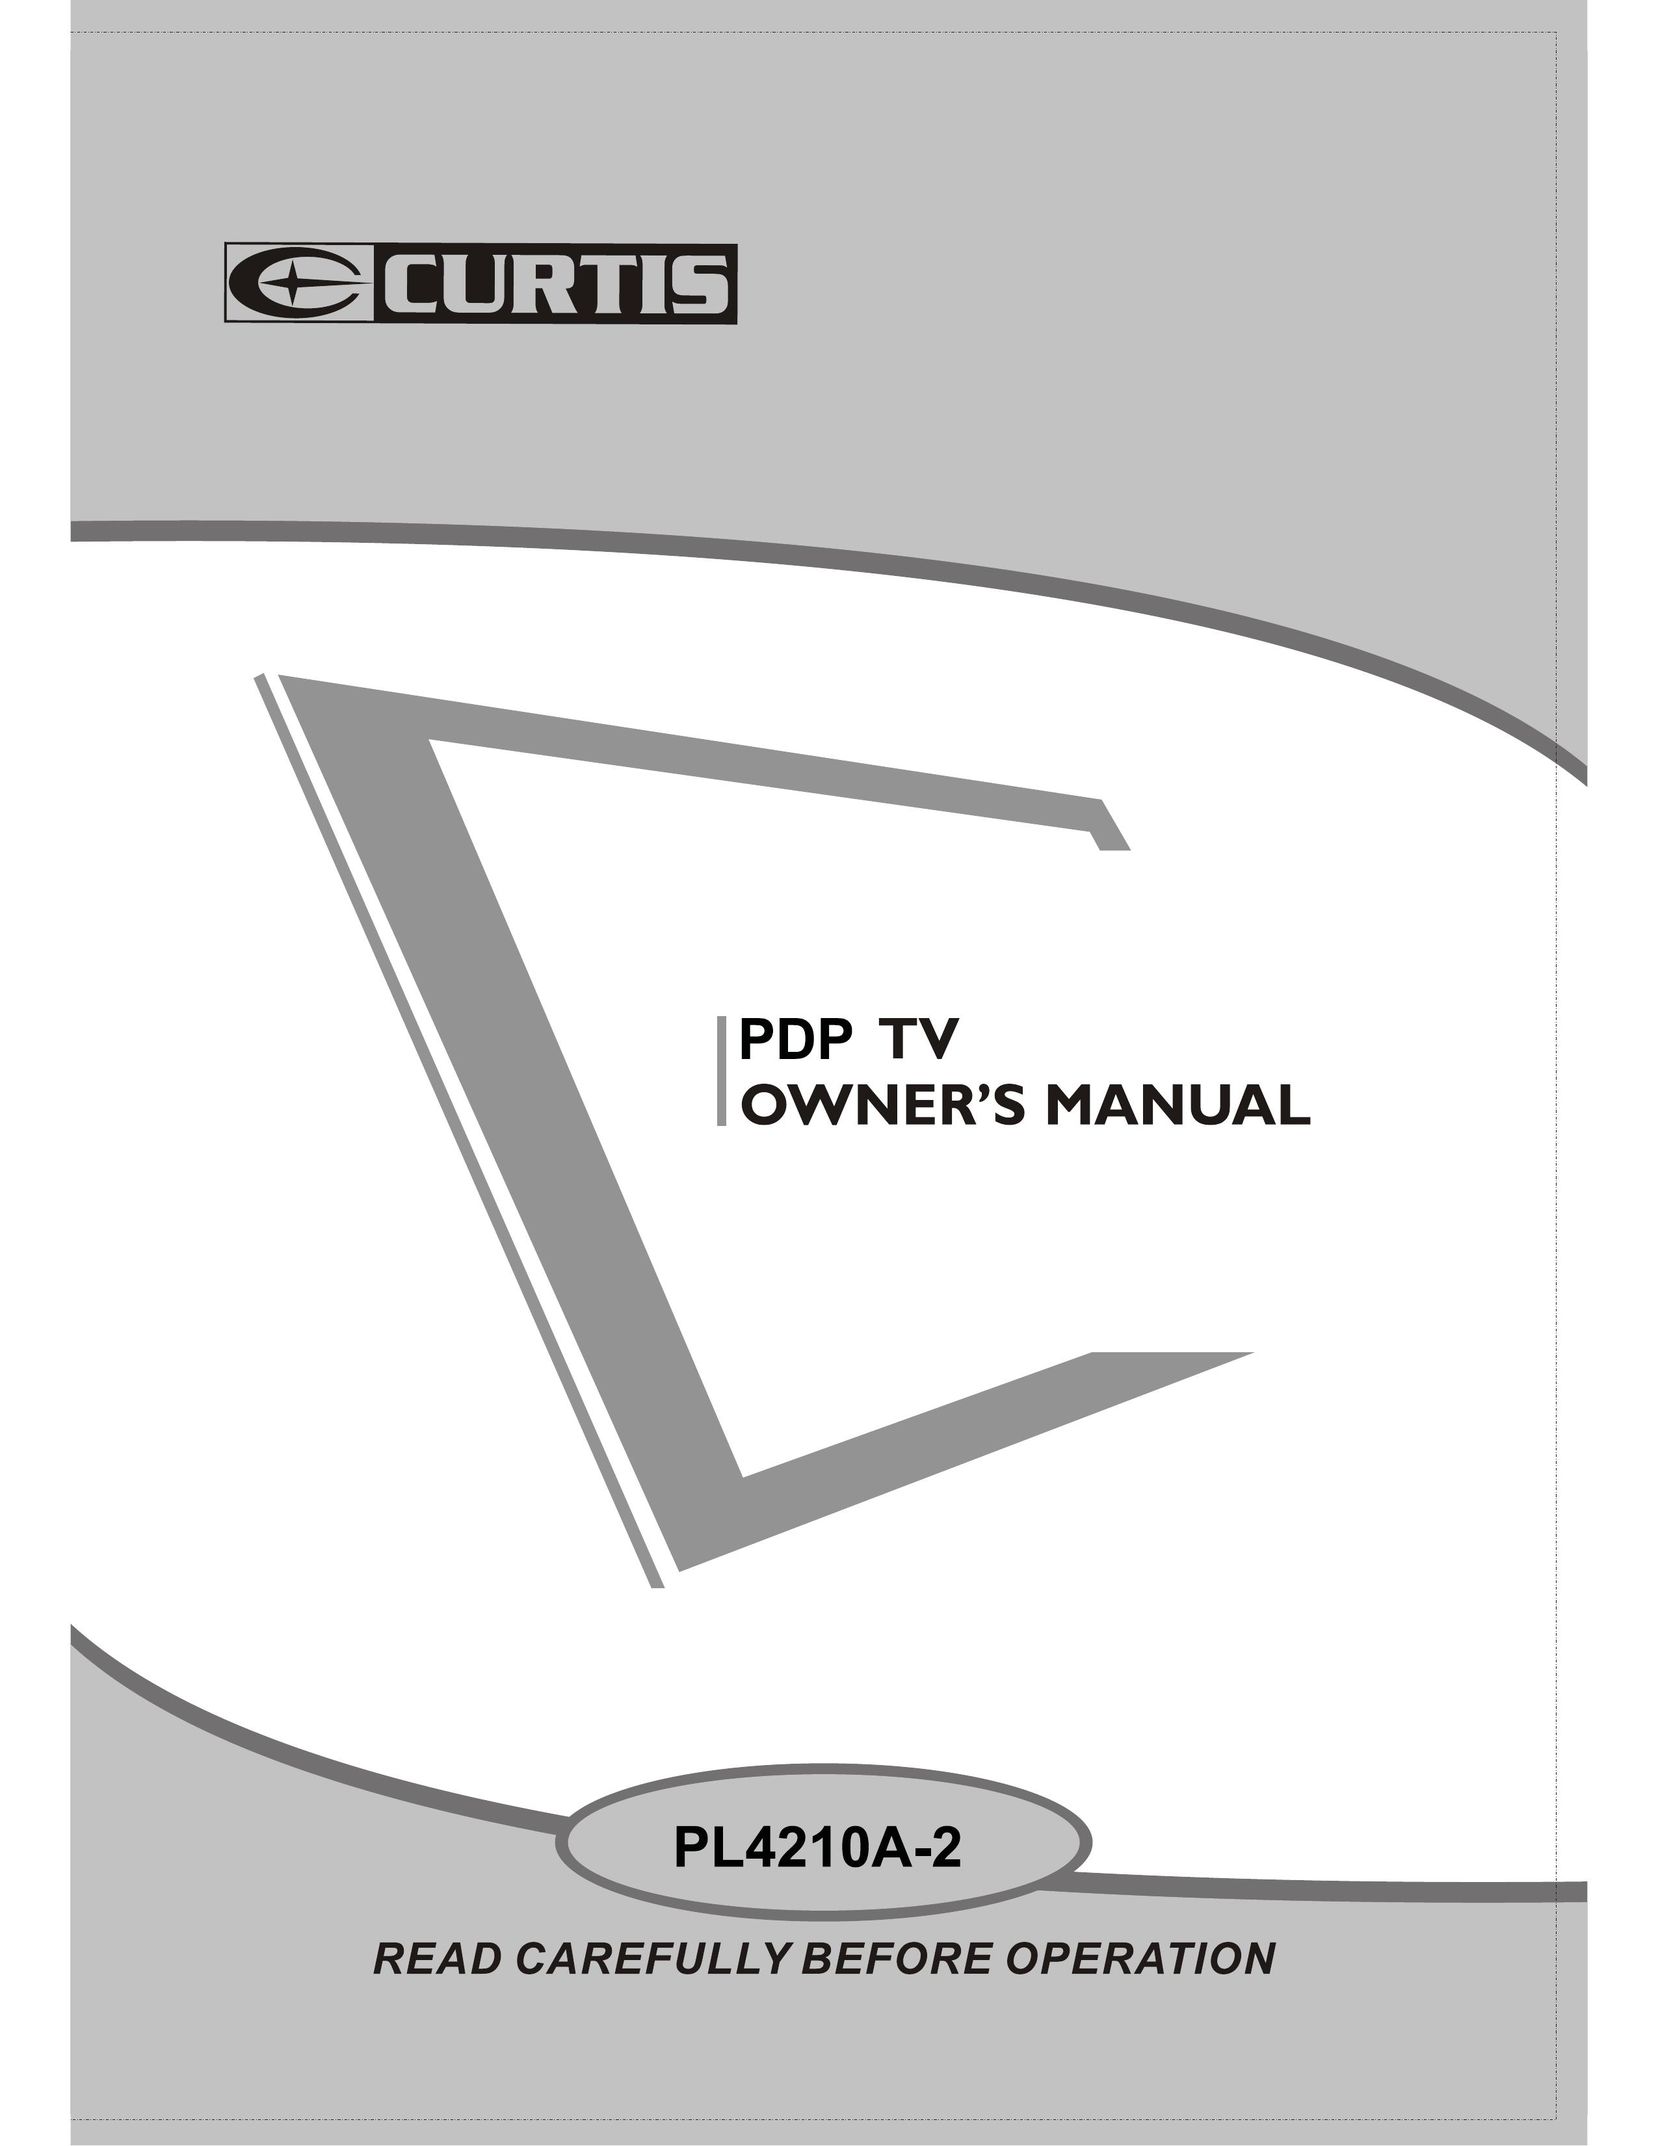 Curtis PL4210A-2 Flat Panel Television User Manual